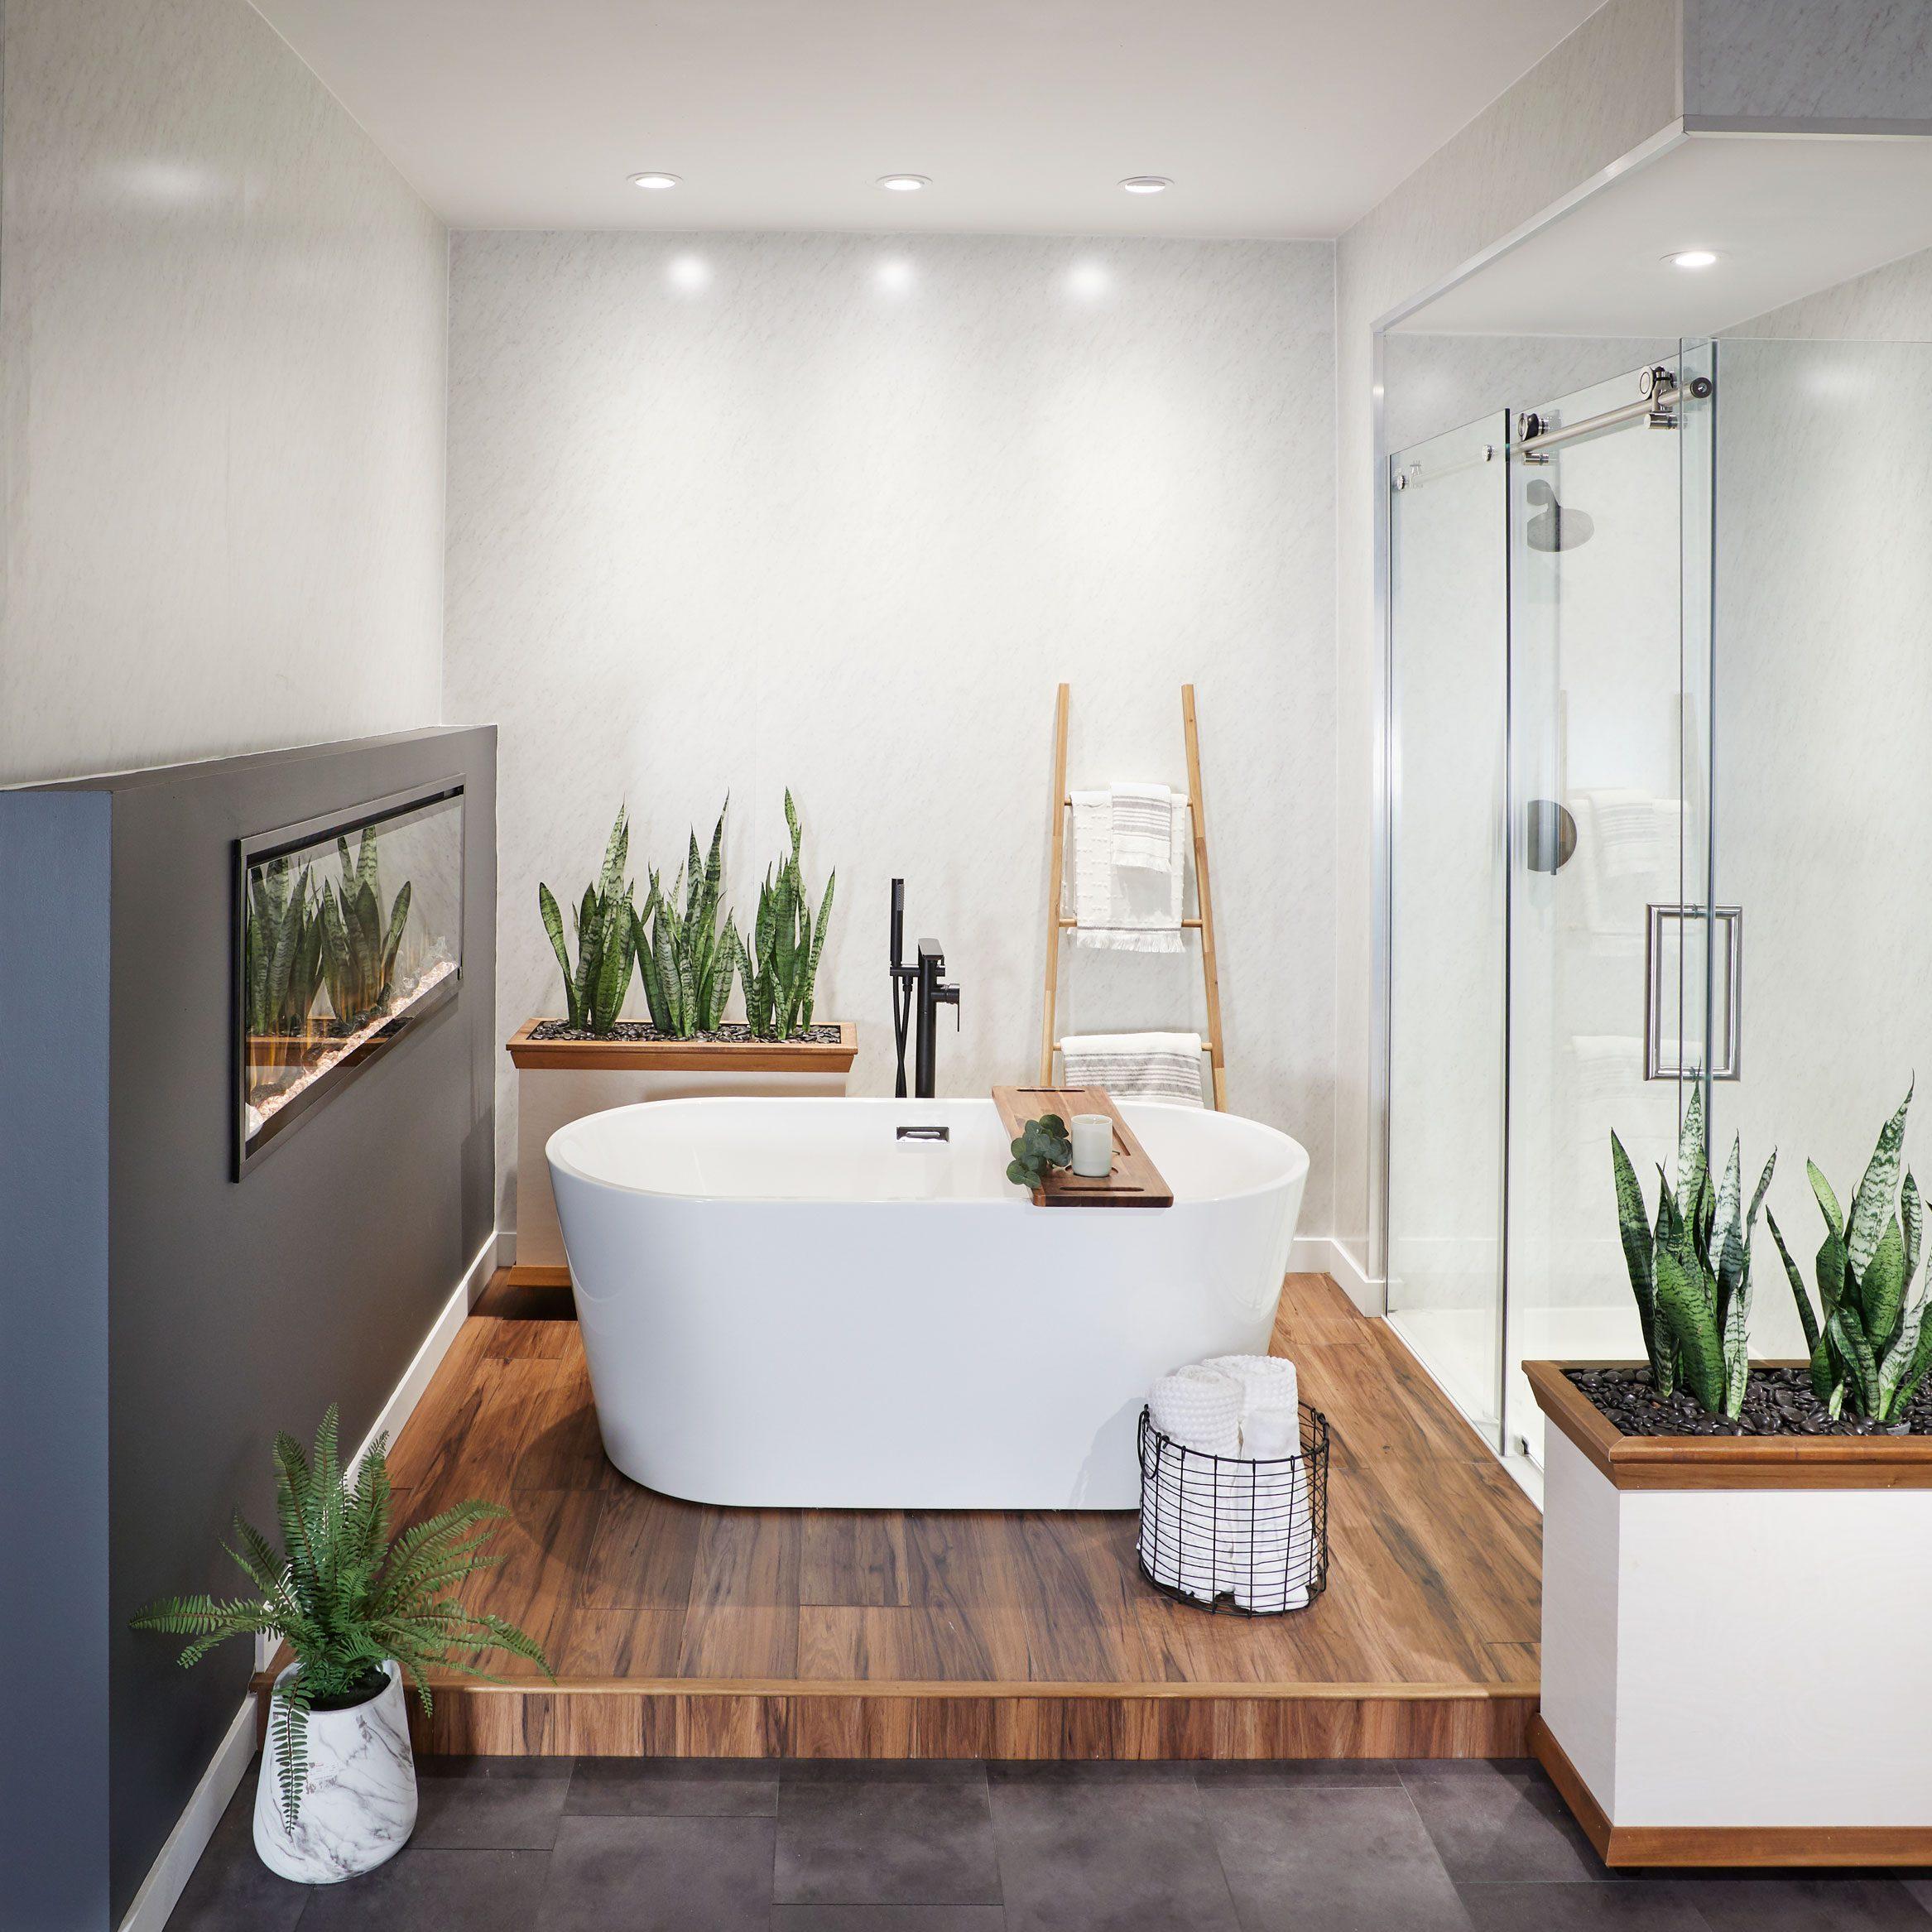 Take the Spa Home With These Simple Spa Bathroom Ideas